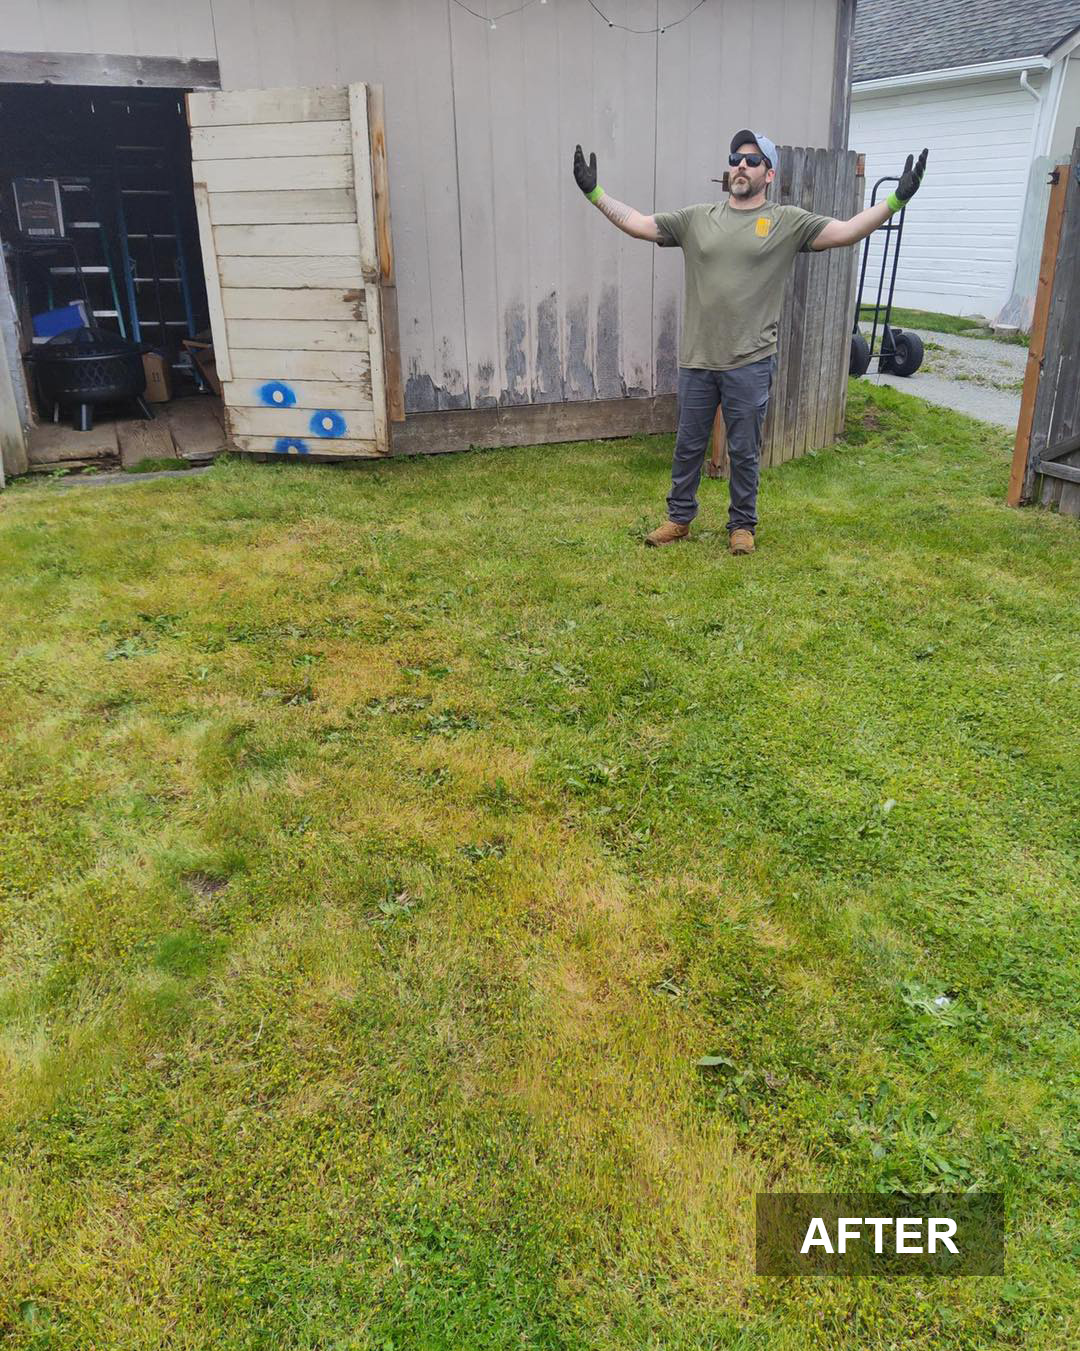 After Cleaning - Arlington, WA - Vets Junk Removal